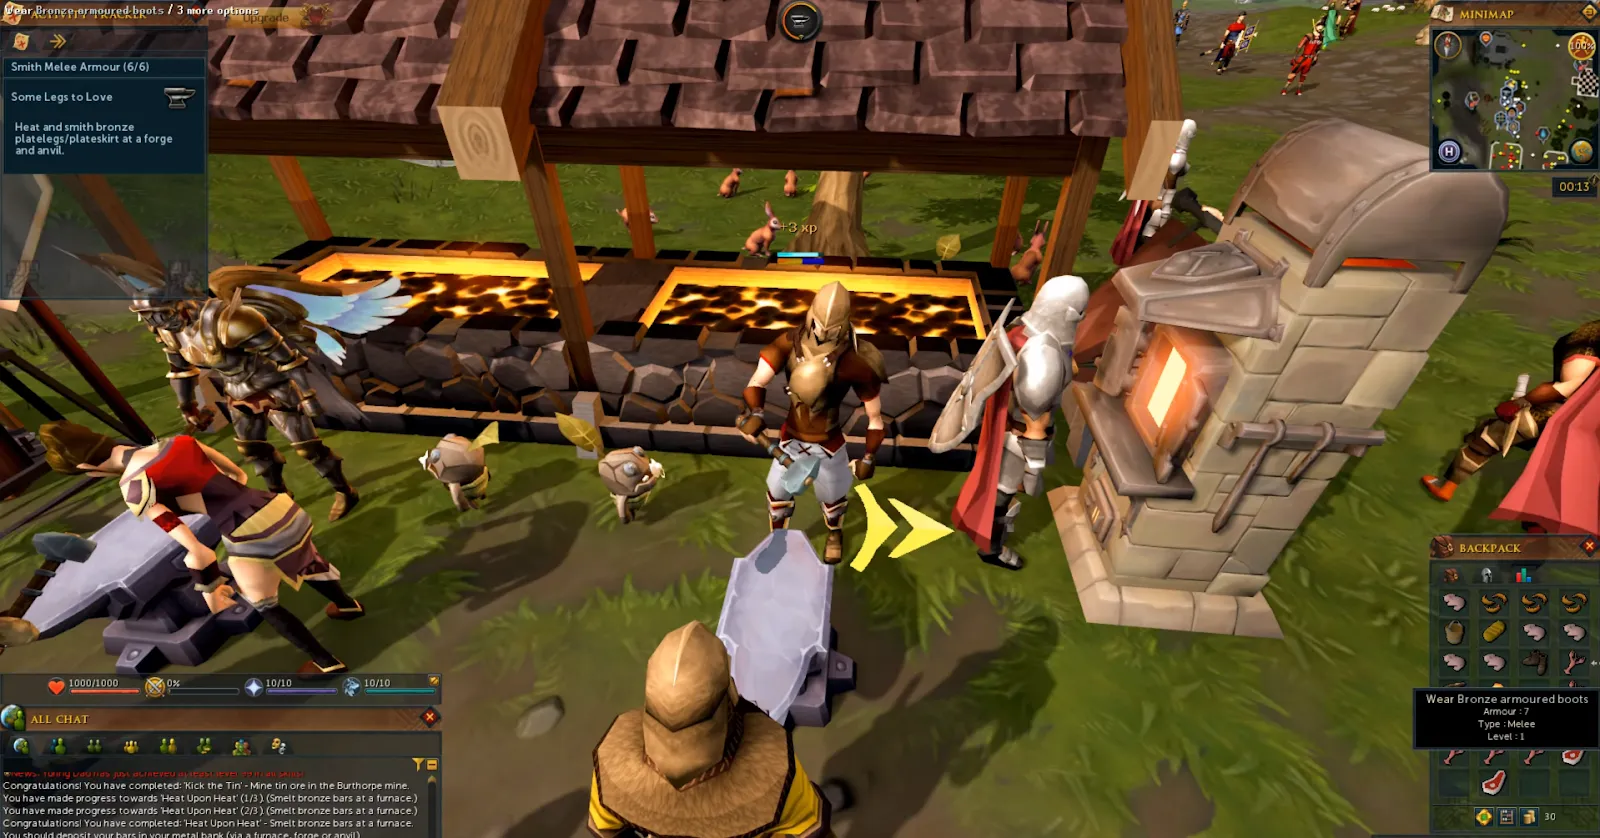 If you play RuneScape with friends, that's one more reason why you should record RuneScape gameplay.